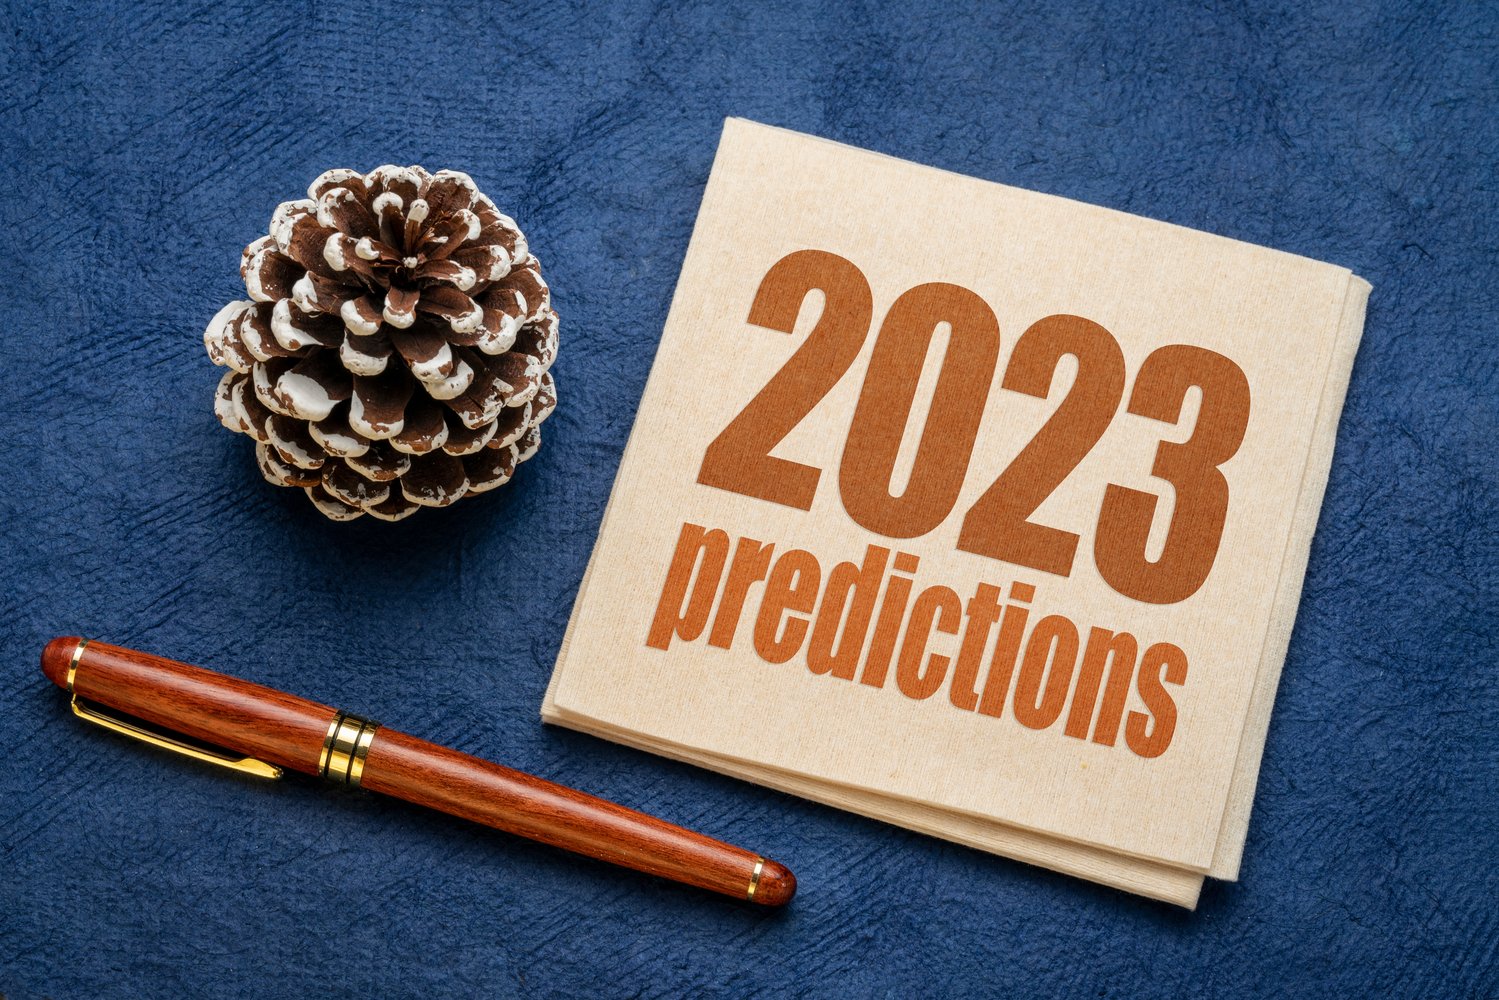 My top five predictions for 2023